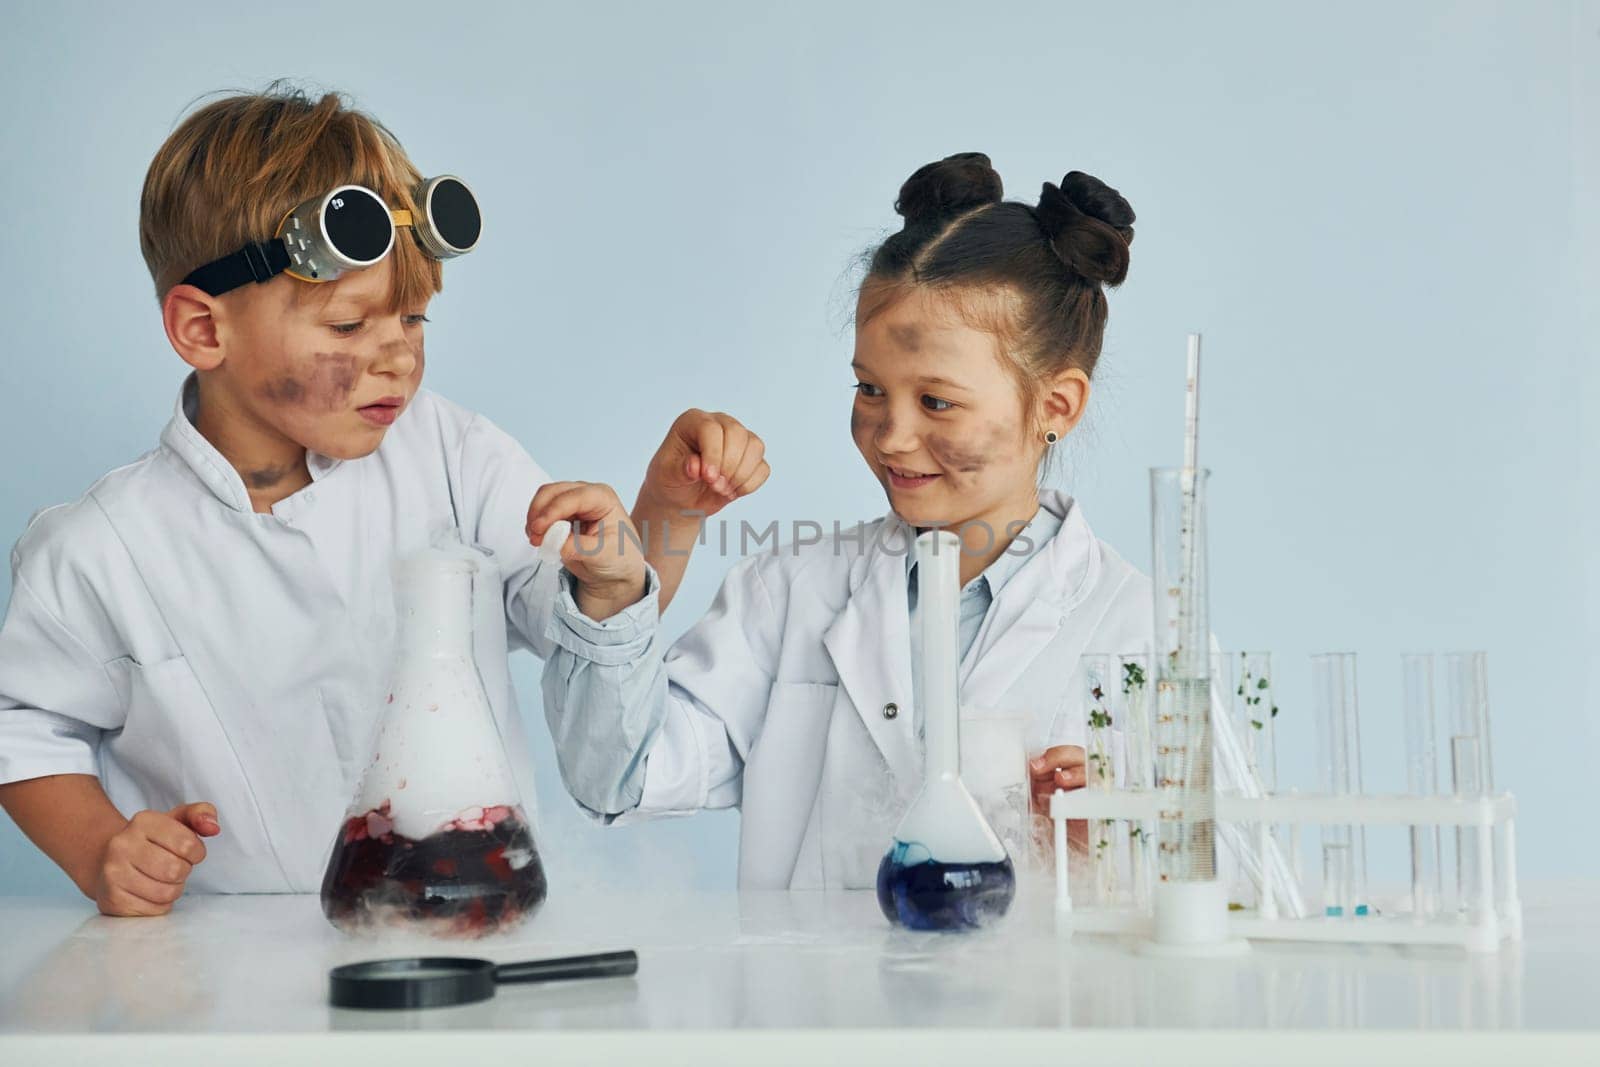 Boy works with liquid in test tubes. Children in white coats plays a scientists in lab by using equipment by Standret